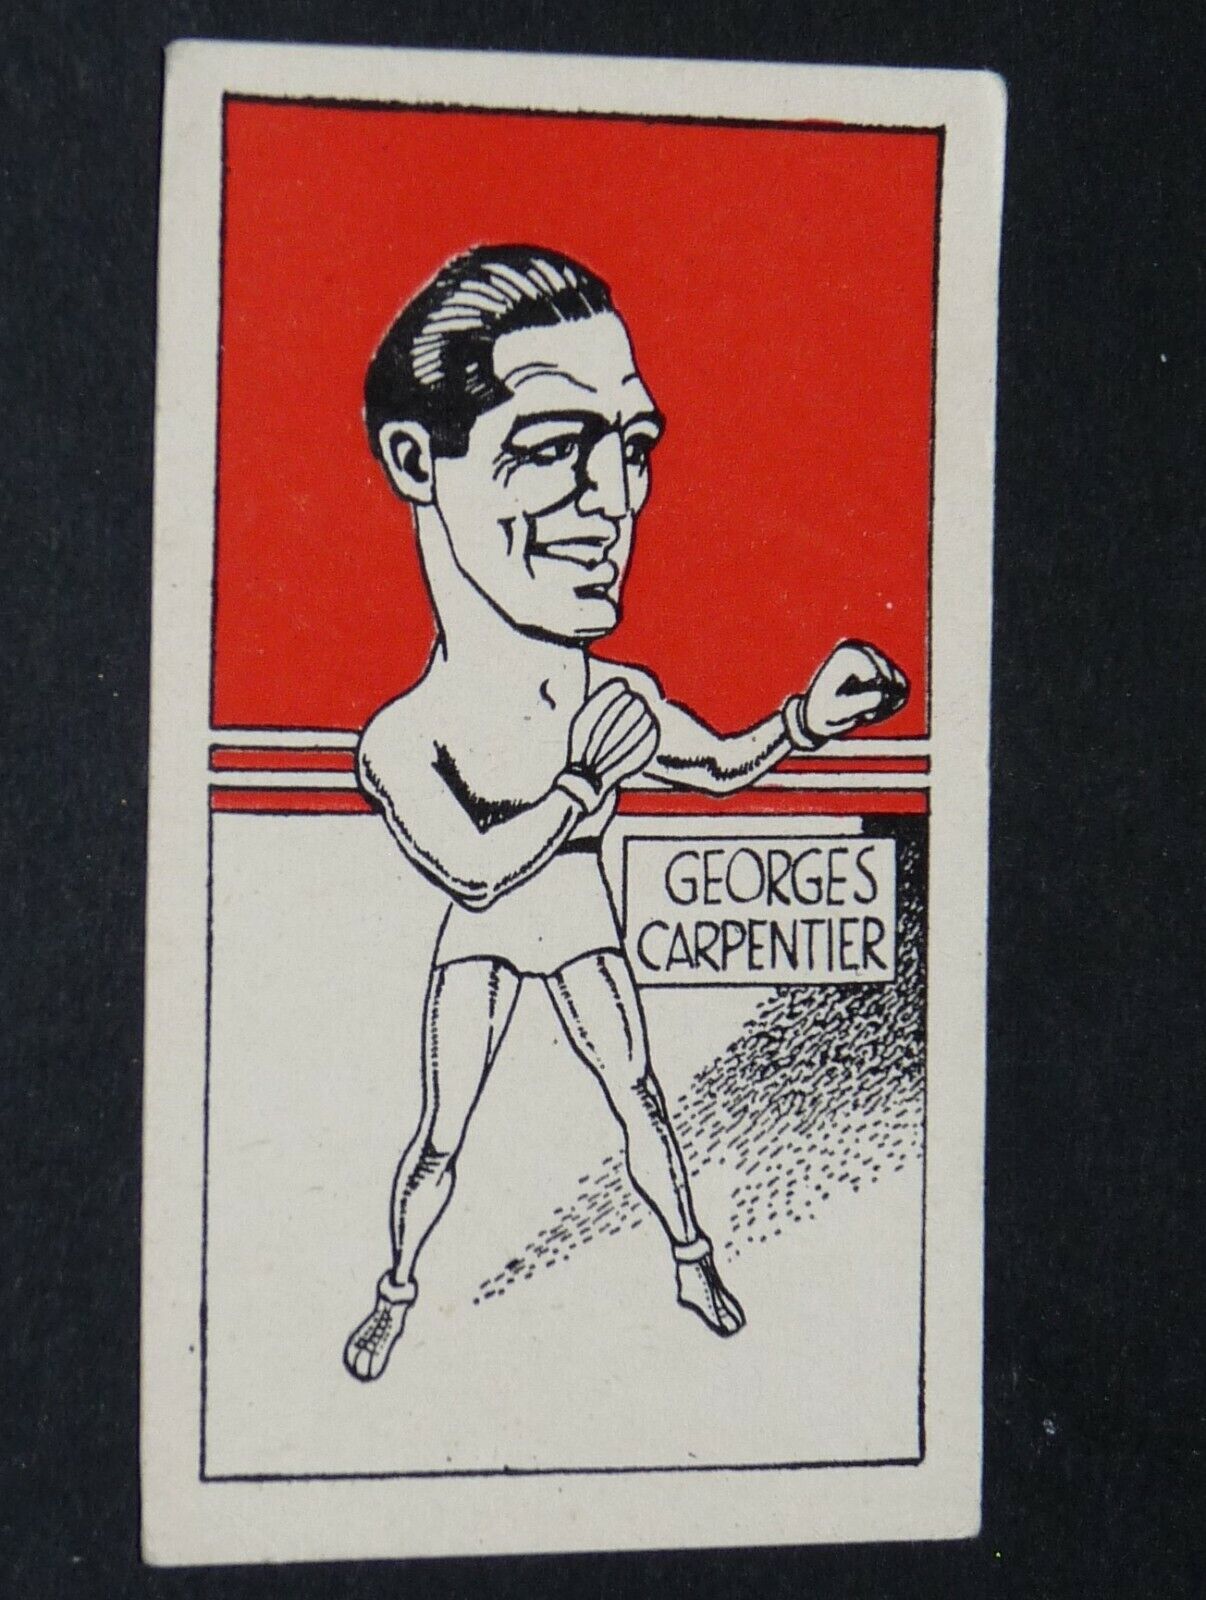 1948 CUMMINGS CARD FAMOUS FIGHTERS #9 GEORGES CARPENTIER BOXING BOXING LIGHT-HEAVY